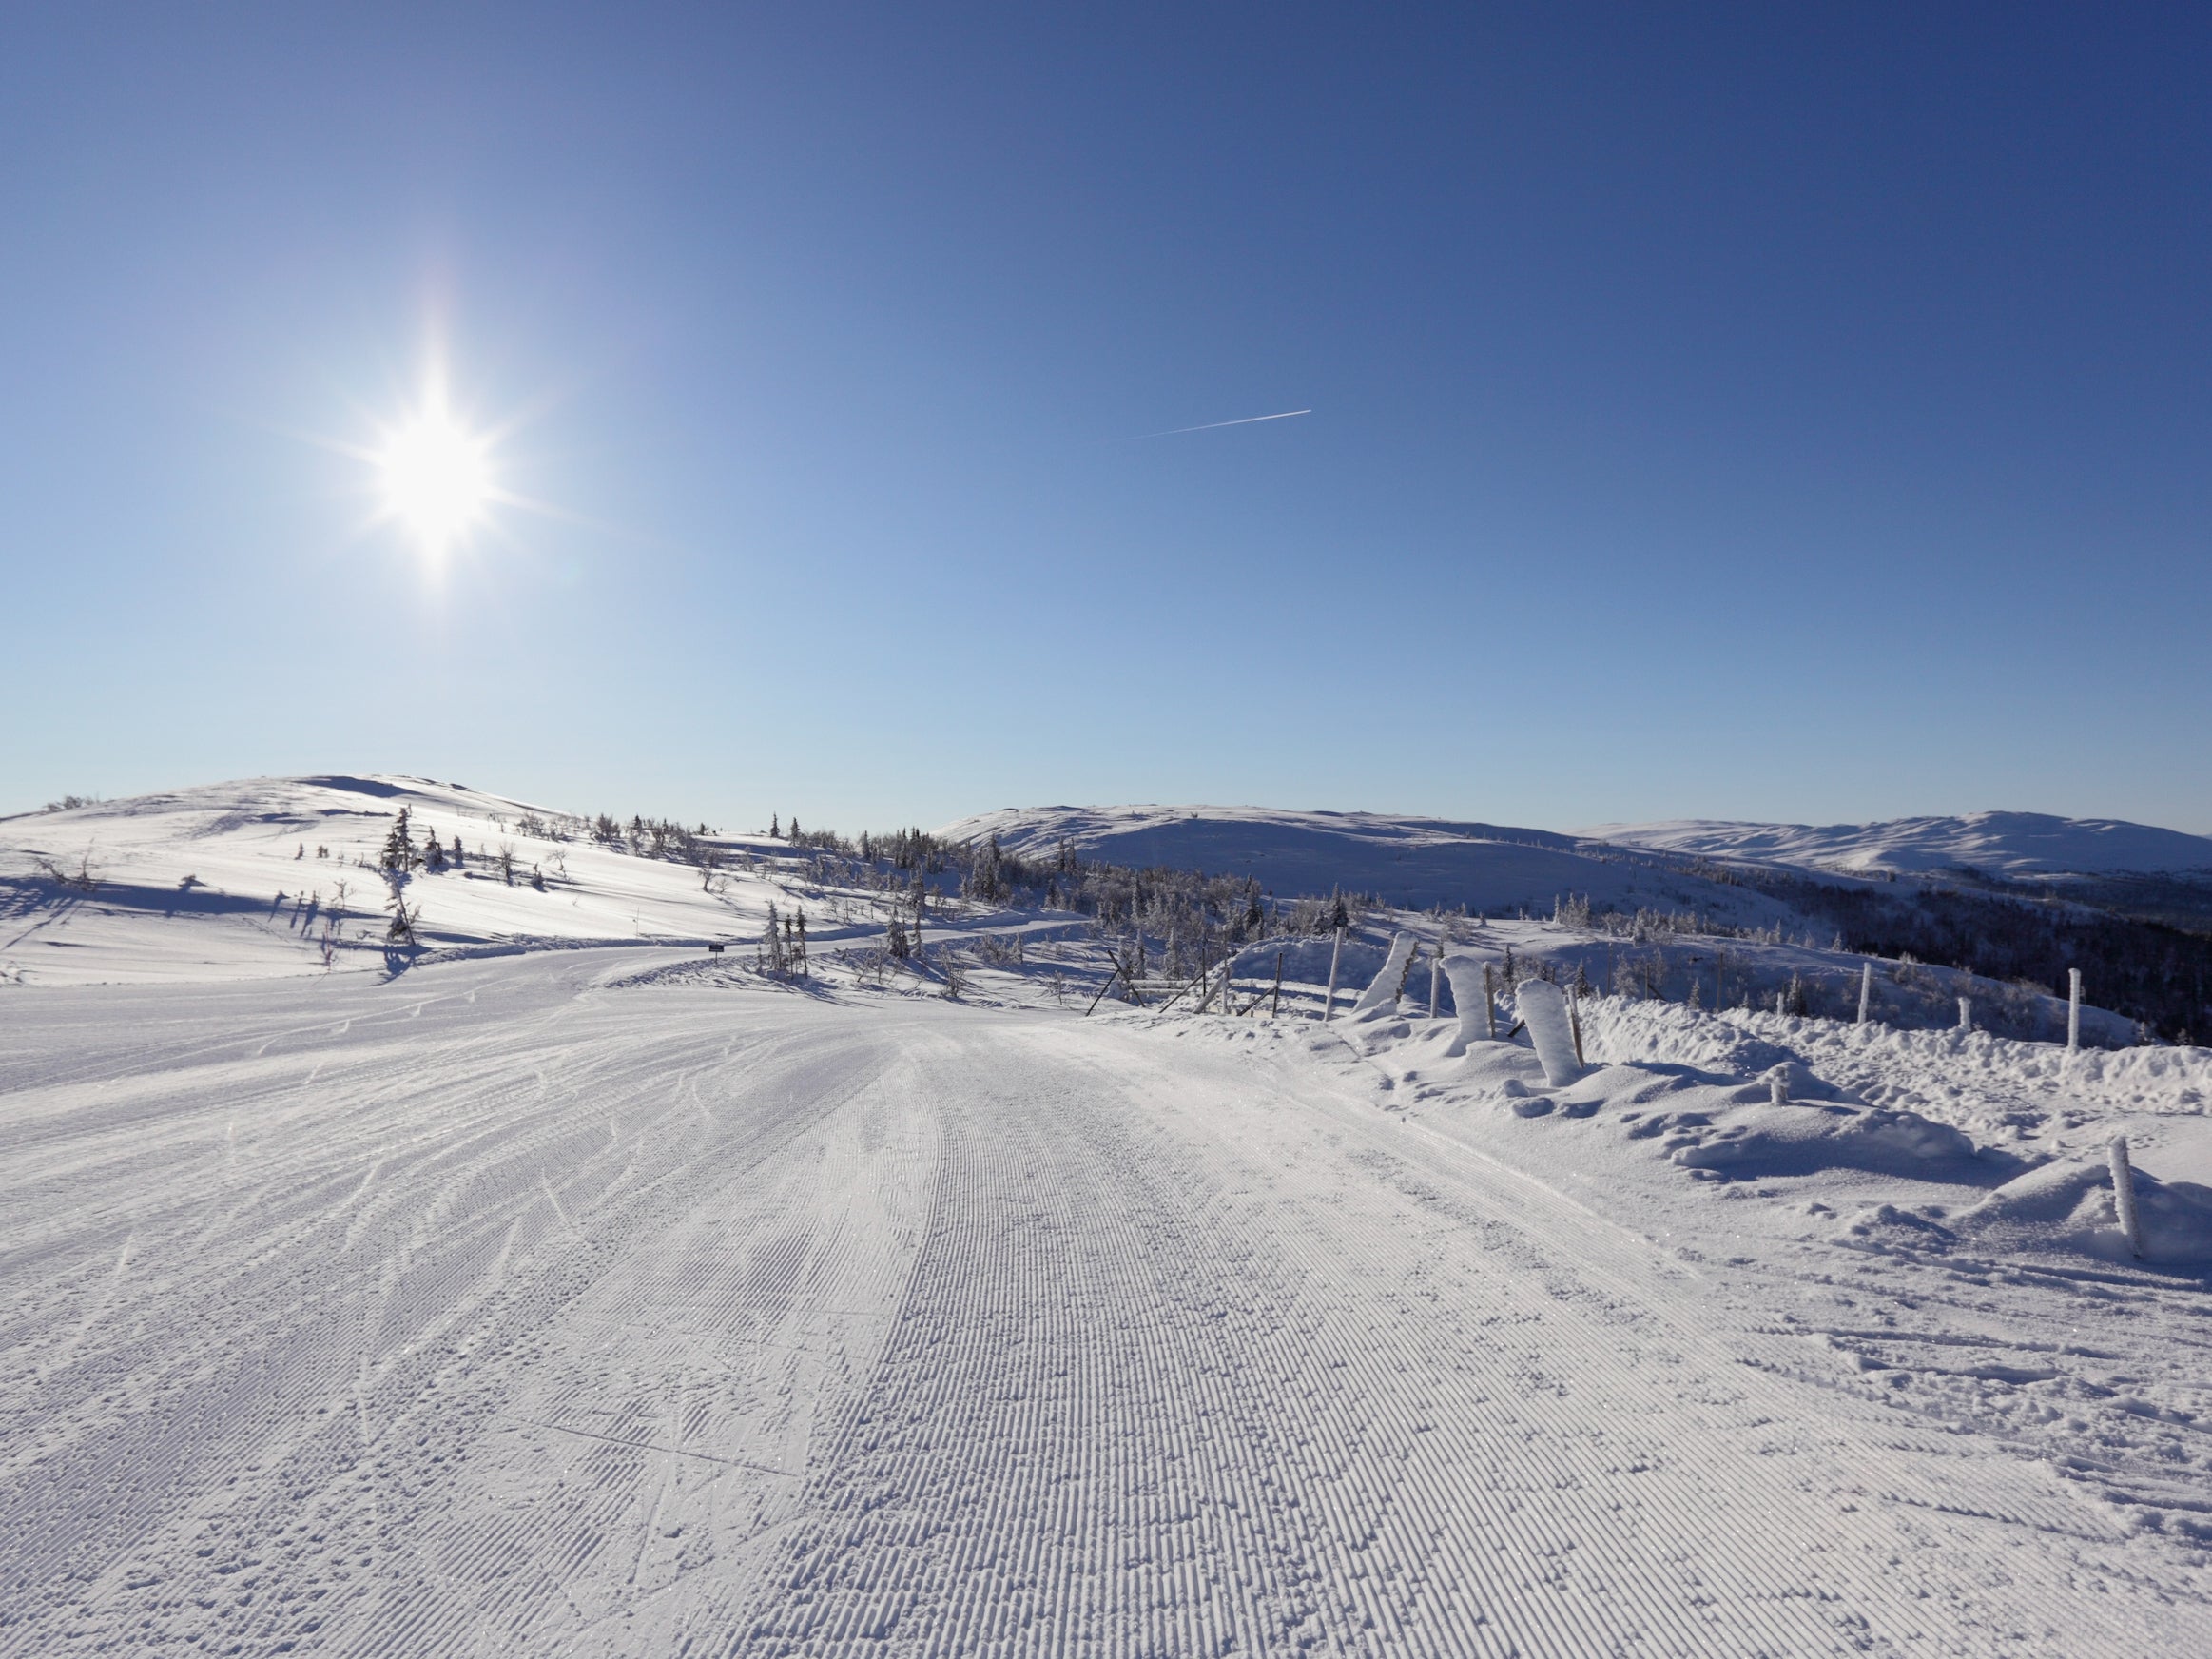 The Björnen area is dedicated to families and beginners with child-friendly lifts